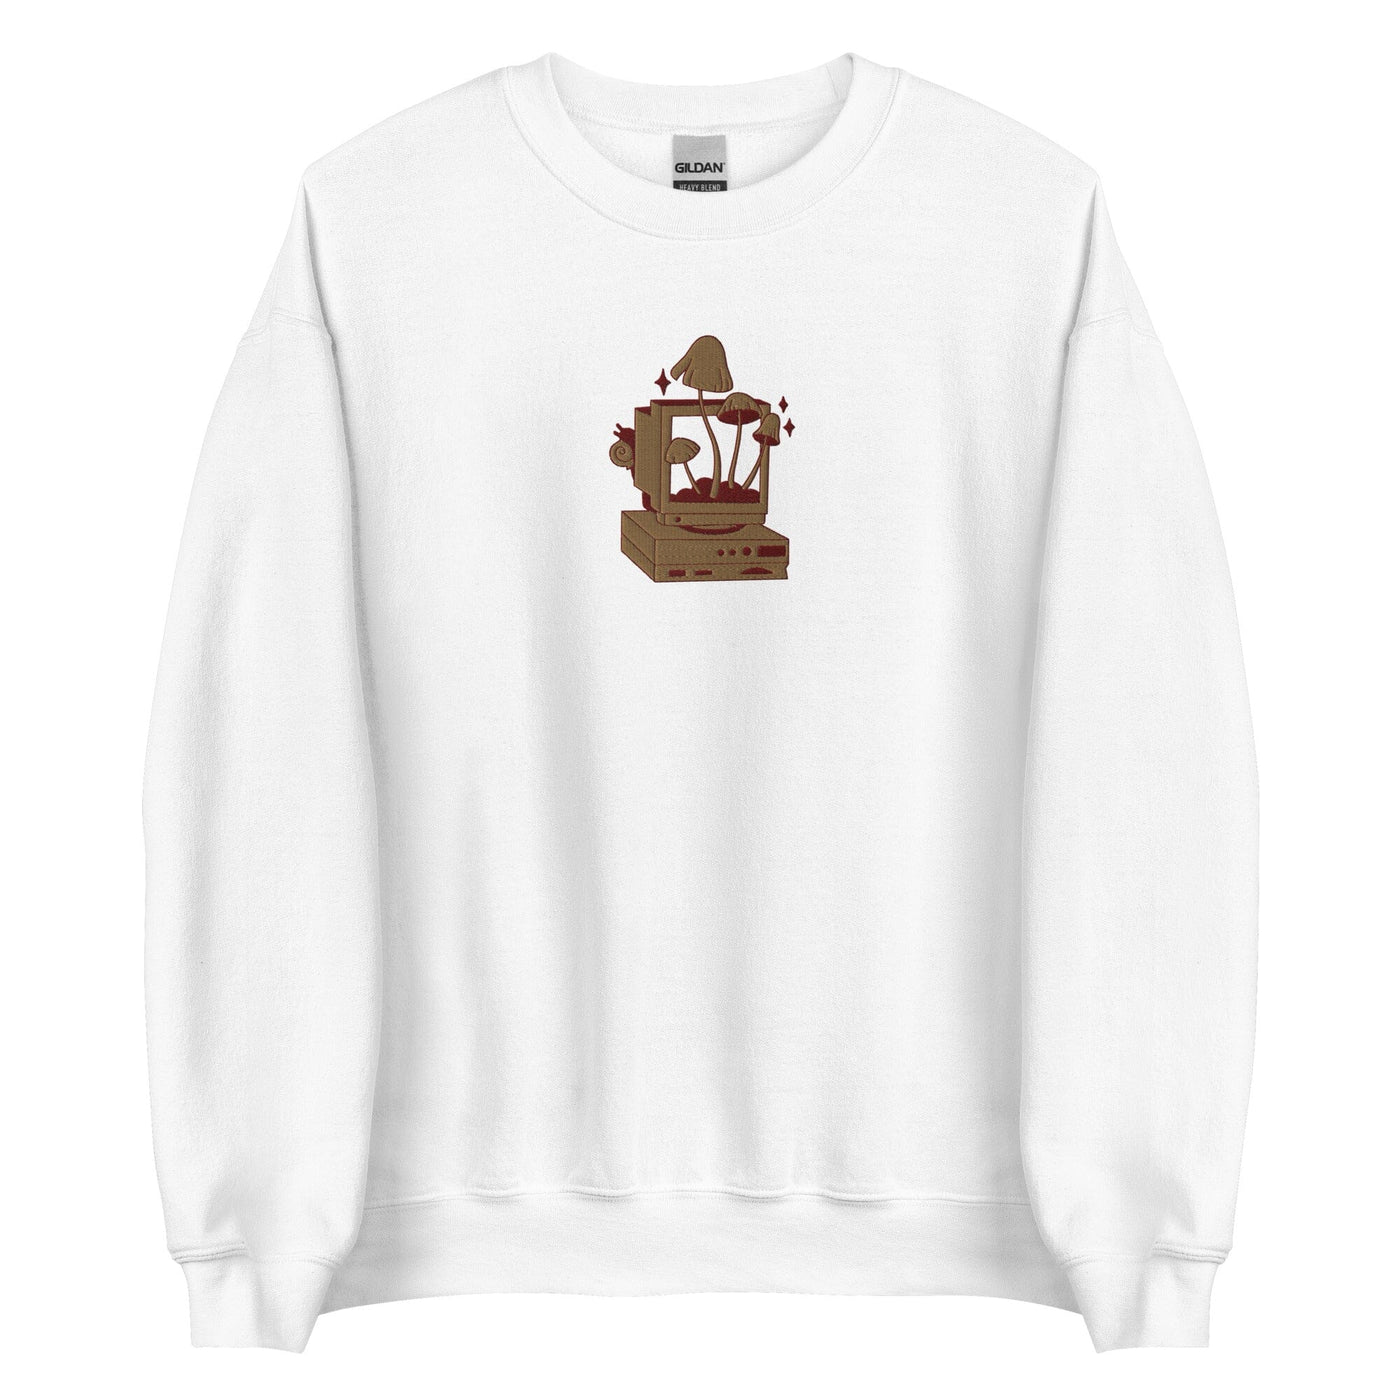 Cozy PC Gaming | Embroidered Unisex Sweatshirt | Cozy Gamer Threads & Thistles Inventory White S 